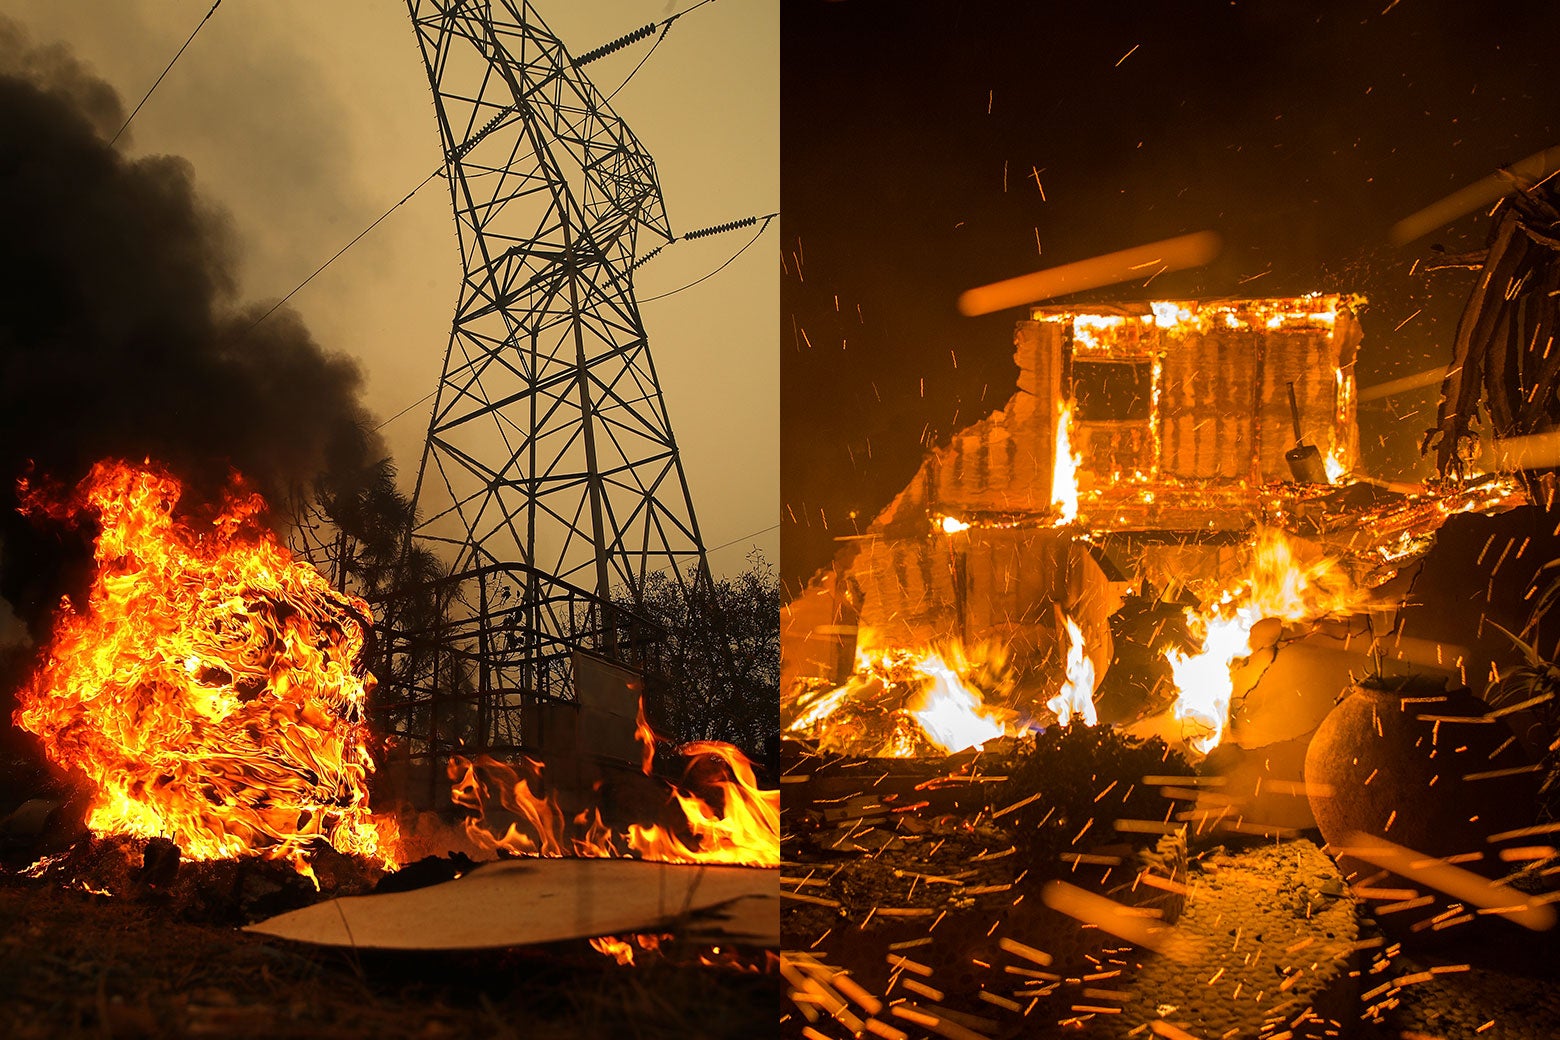 On the left, a fire burns by power lines, and on the left, fire burns structures.